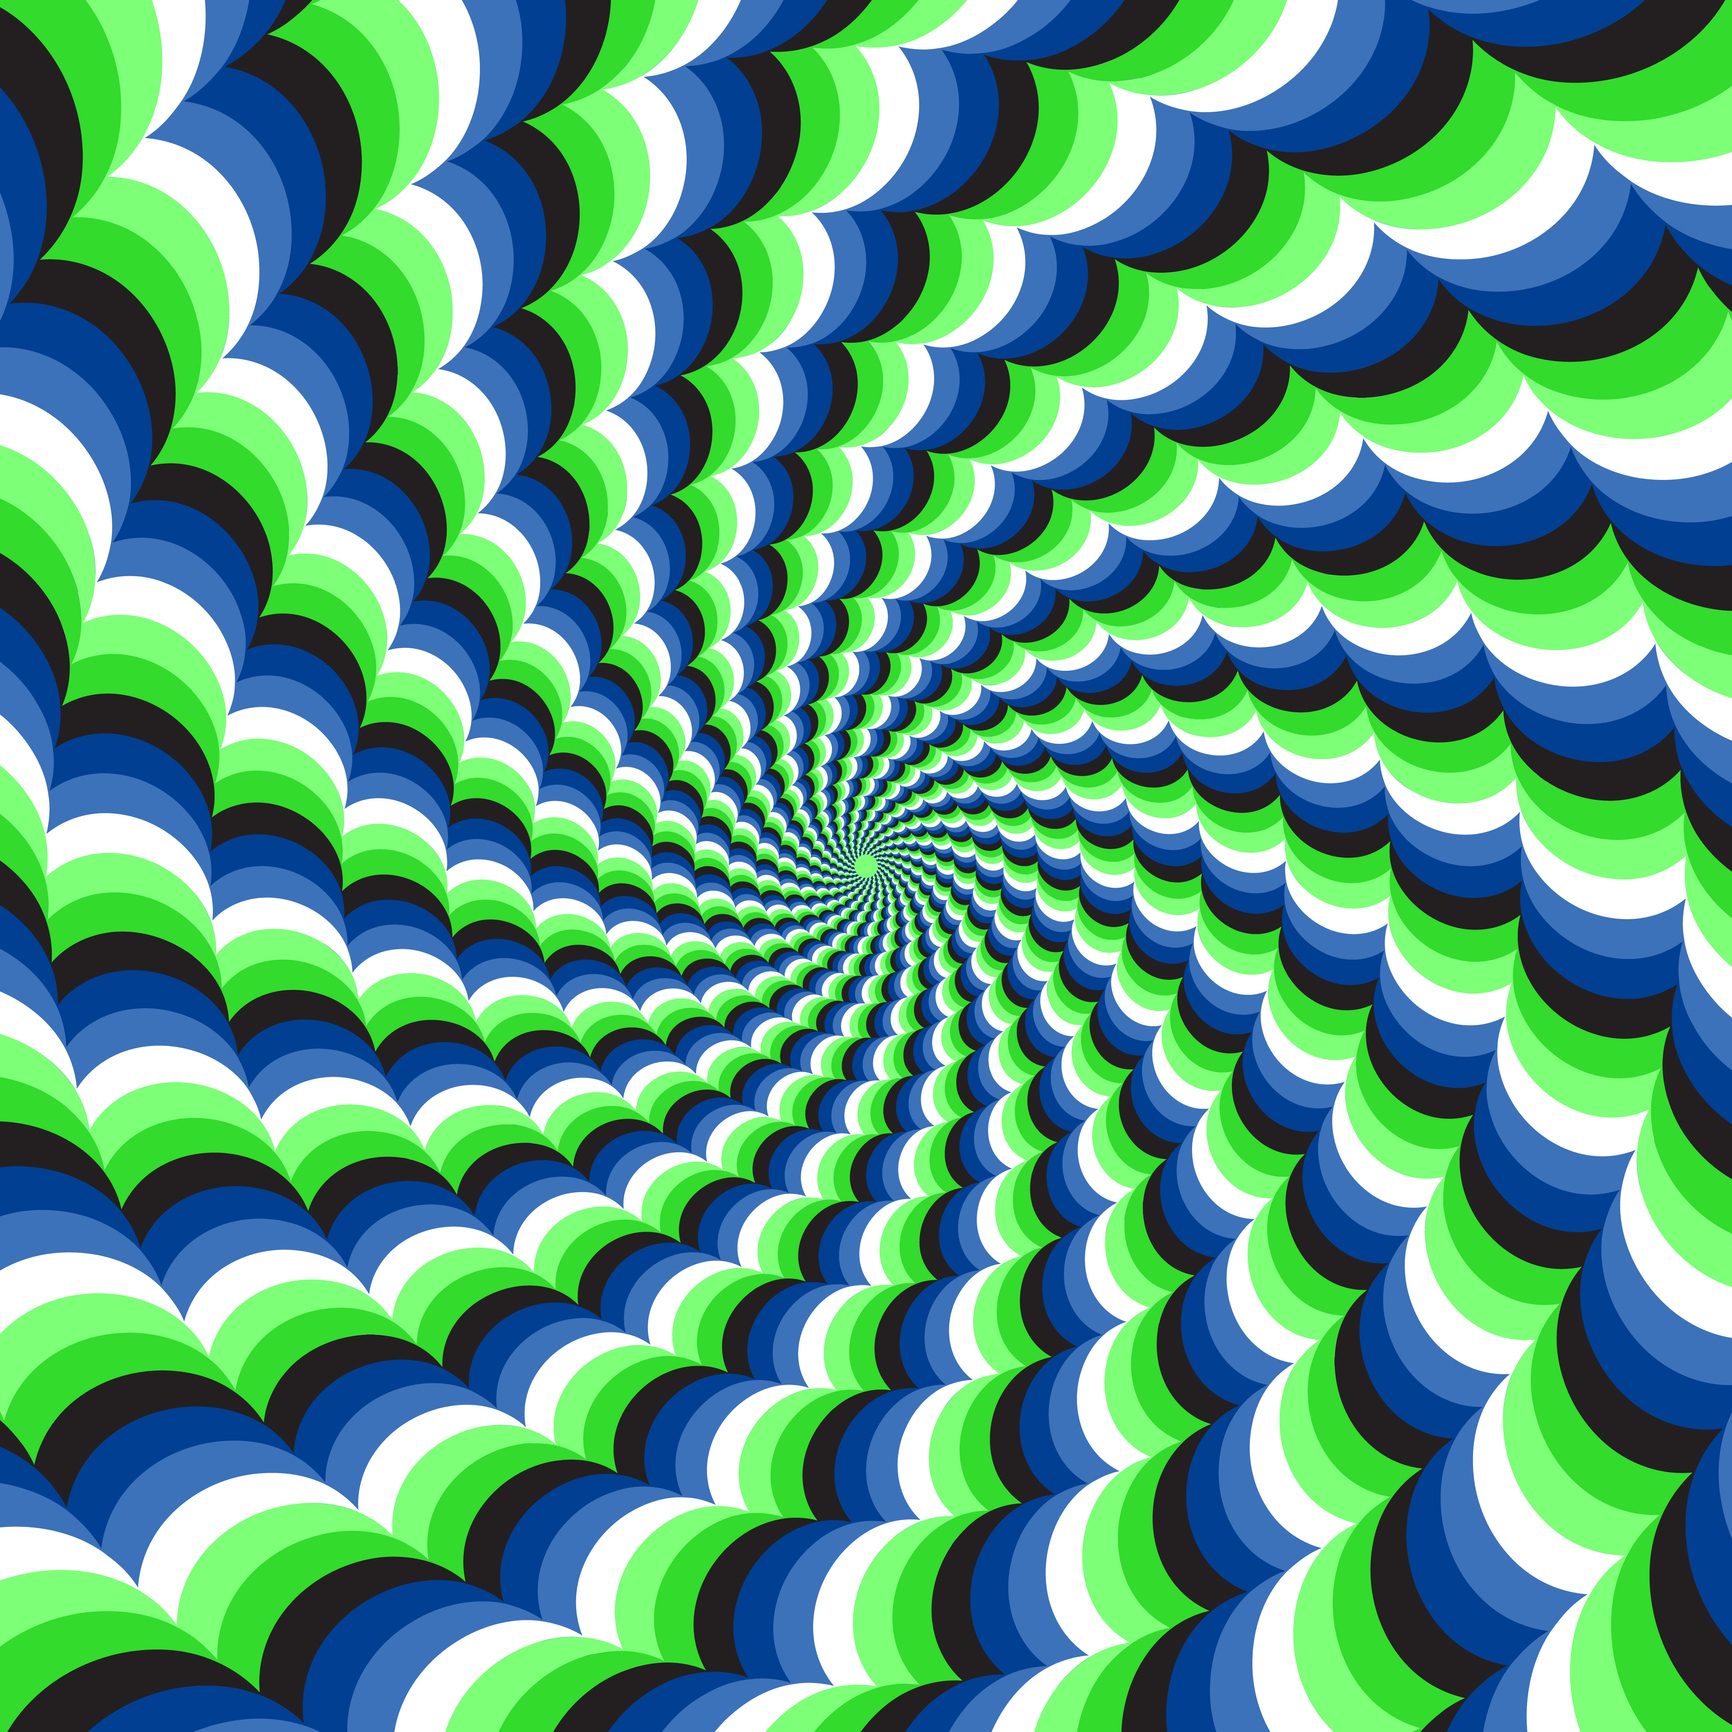 30 Optical Illusions That Will Make Your Brain Hurt Reader's Digest